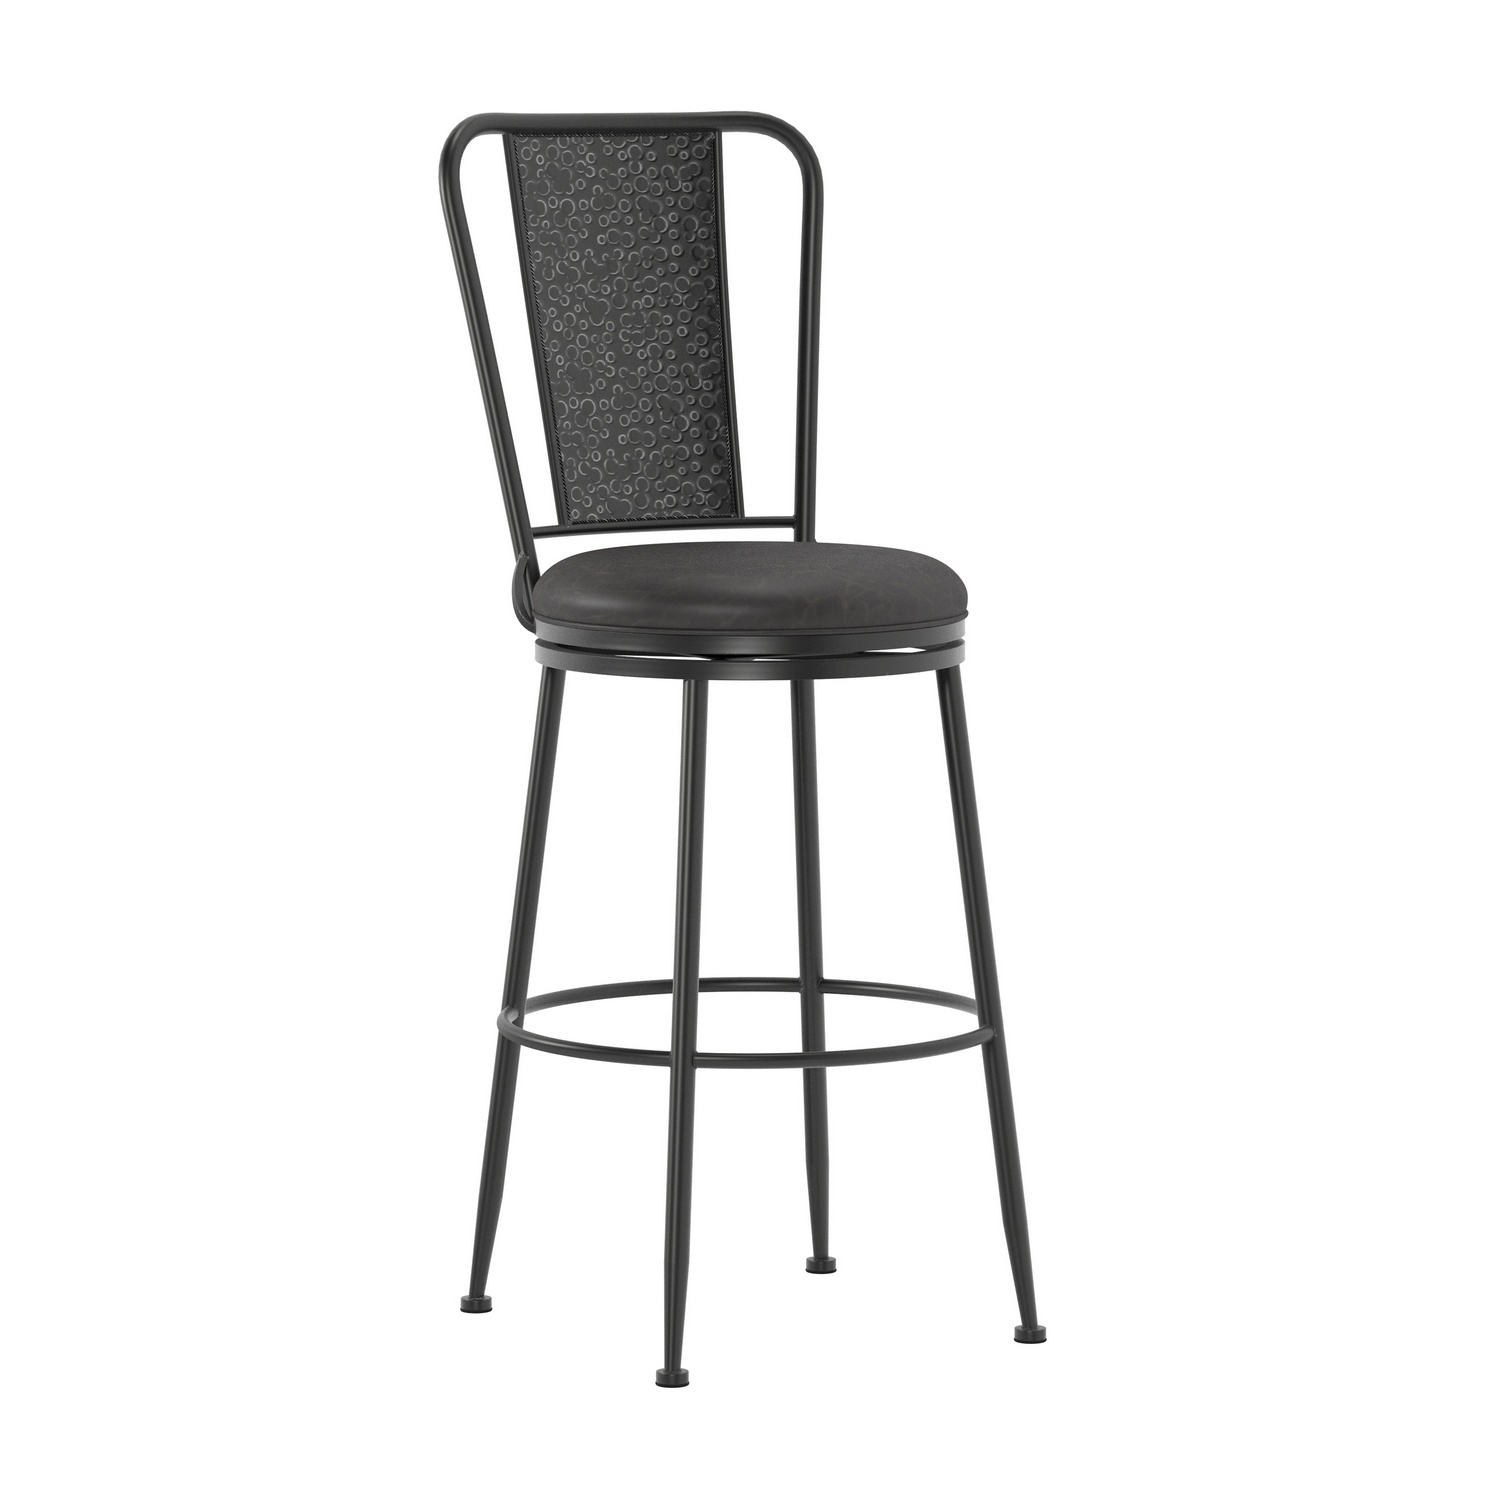 Hillsdale Inverness Commercial Grade Metal Bar Height Swivel Stool - Silver